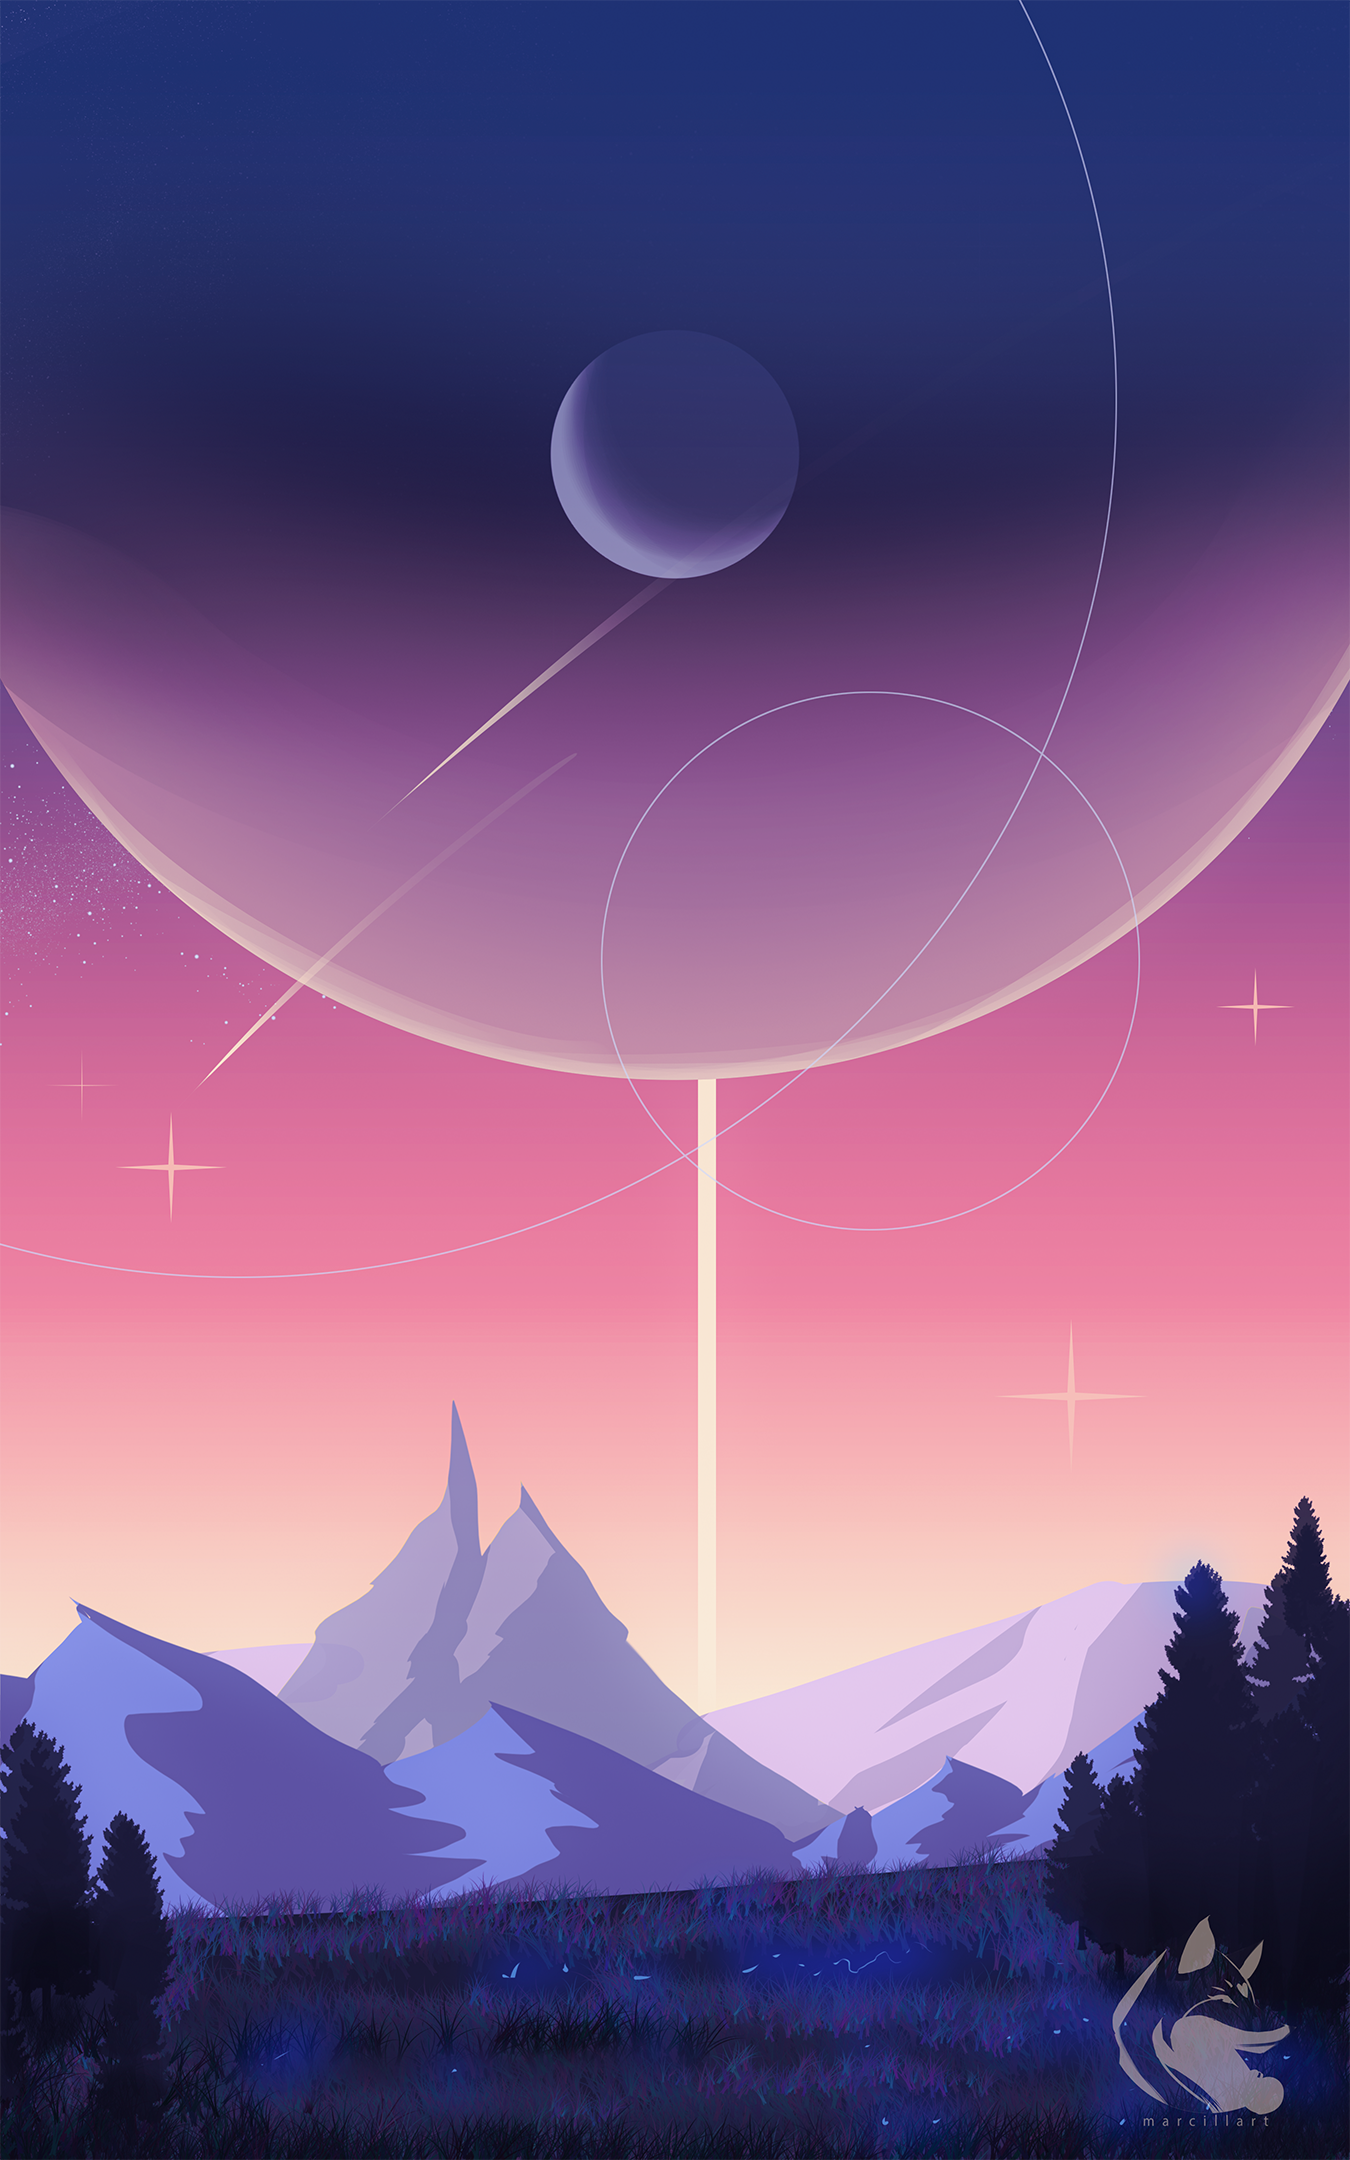 General 1350x2160 planet mountains trees pine trees minimalism stars space shooting stars purple sky evening sunset Moon giant